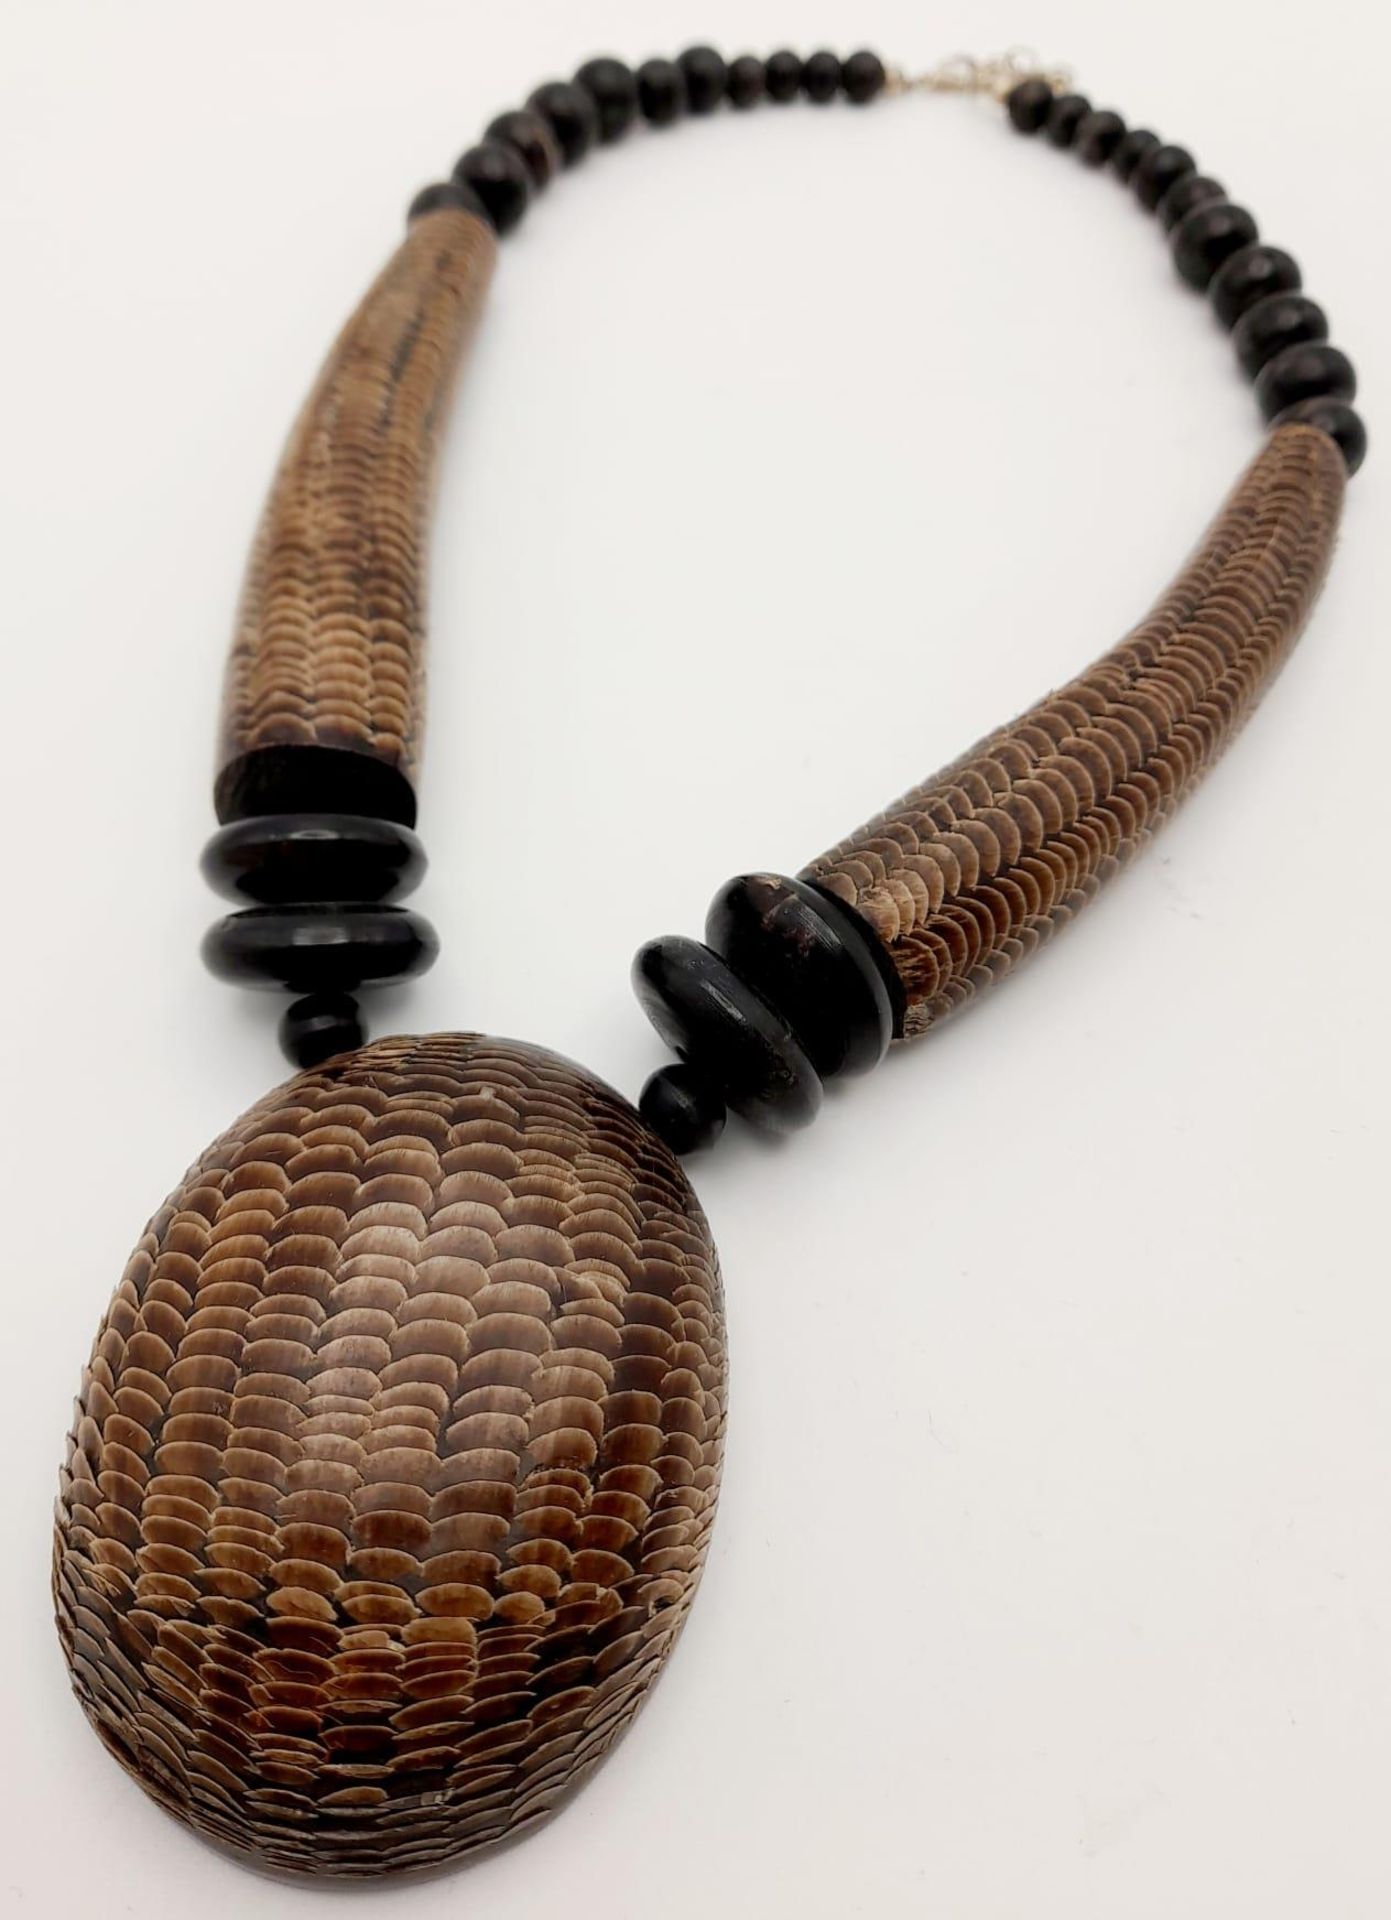 An East African talisman’s necklace, made with snakeskin and other materials, used by voodoo doctors - Image 2 of 6